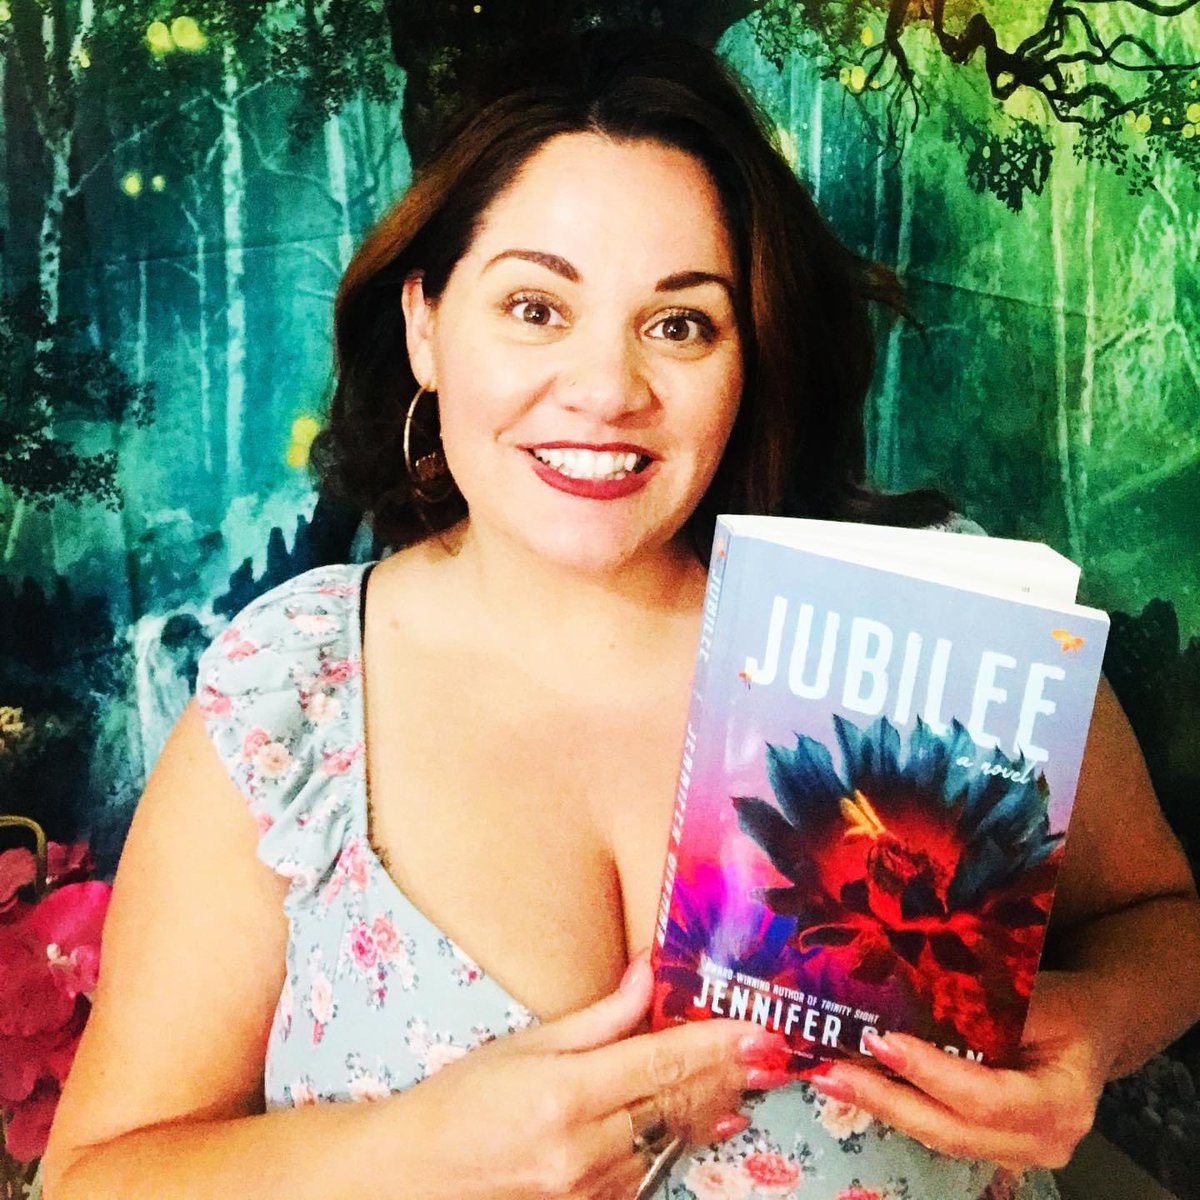 Today’s a good day to buy a book — may I recommend my Jubilee ✨✨✨

#jubileebook #bookstagram #authorsofinstagram #thebrujapoeta @blackstonepublishing